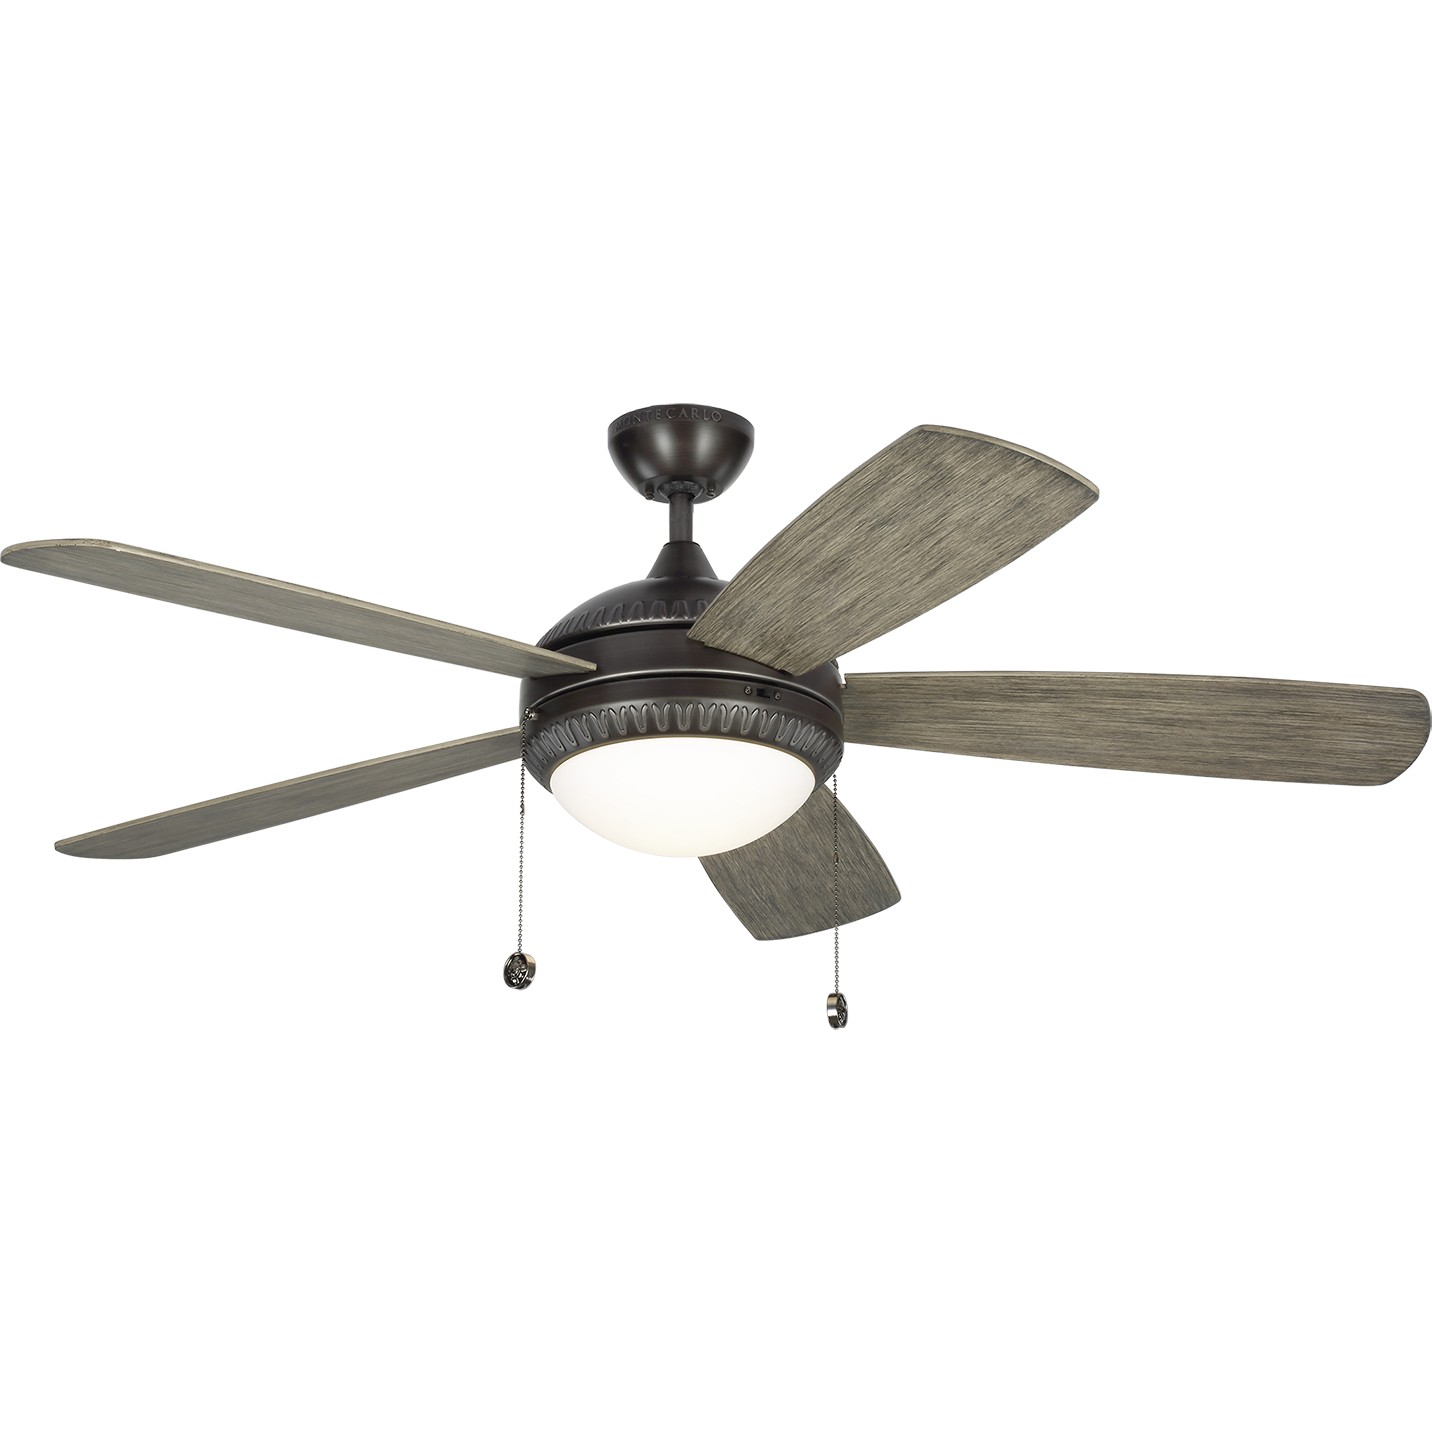 Discus Ornate 52" LED Ceiling Fan